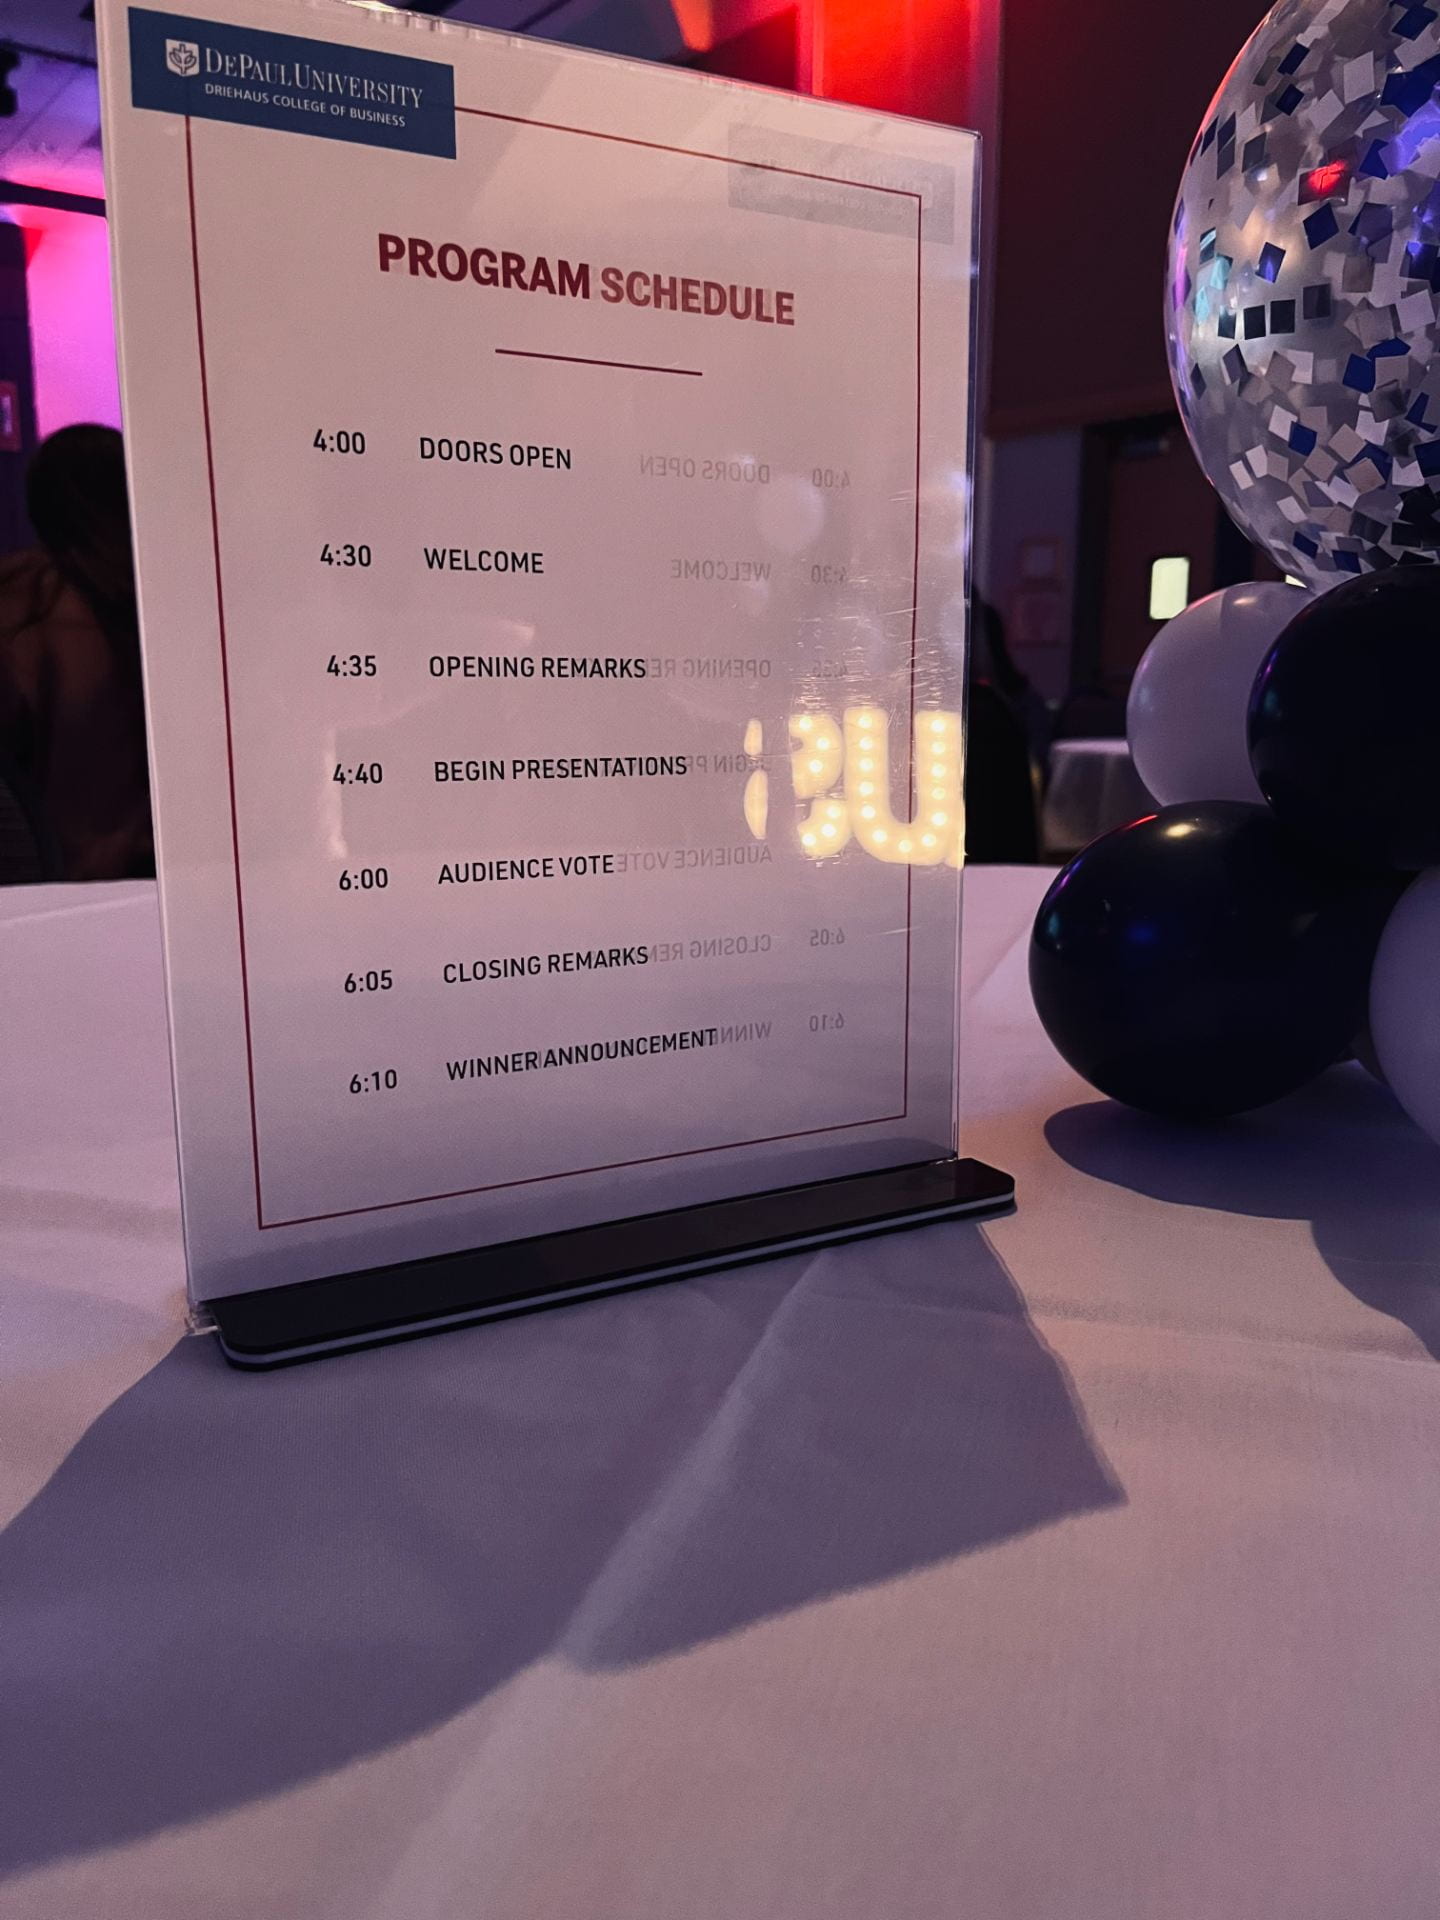 A white table with a depaul blue balloon centerpiece. Along with a program schedule outline the Driehaus Cup schedule.